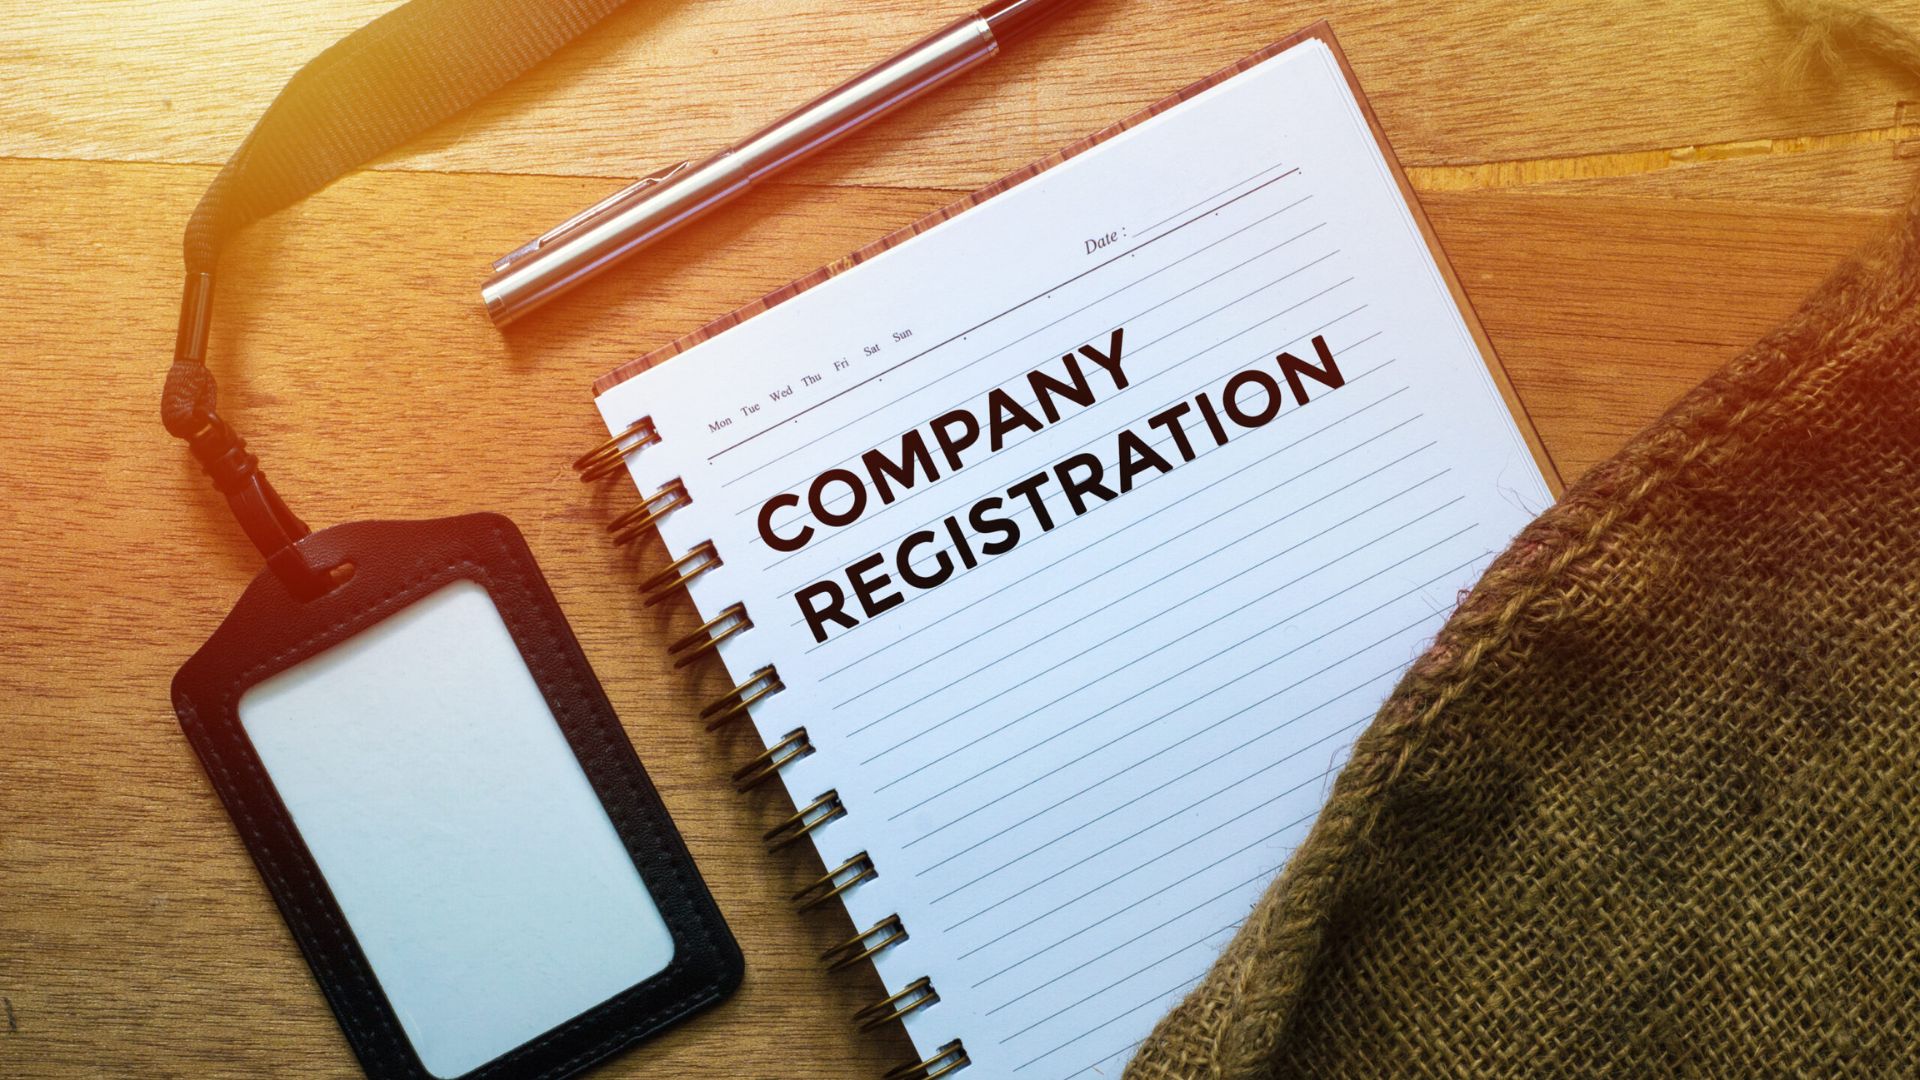 What Are the Legal Requirements for Company Registration